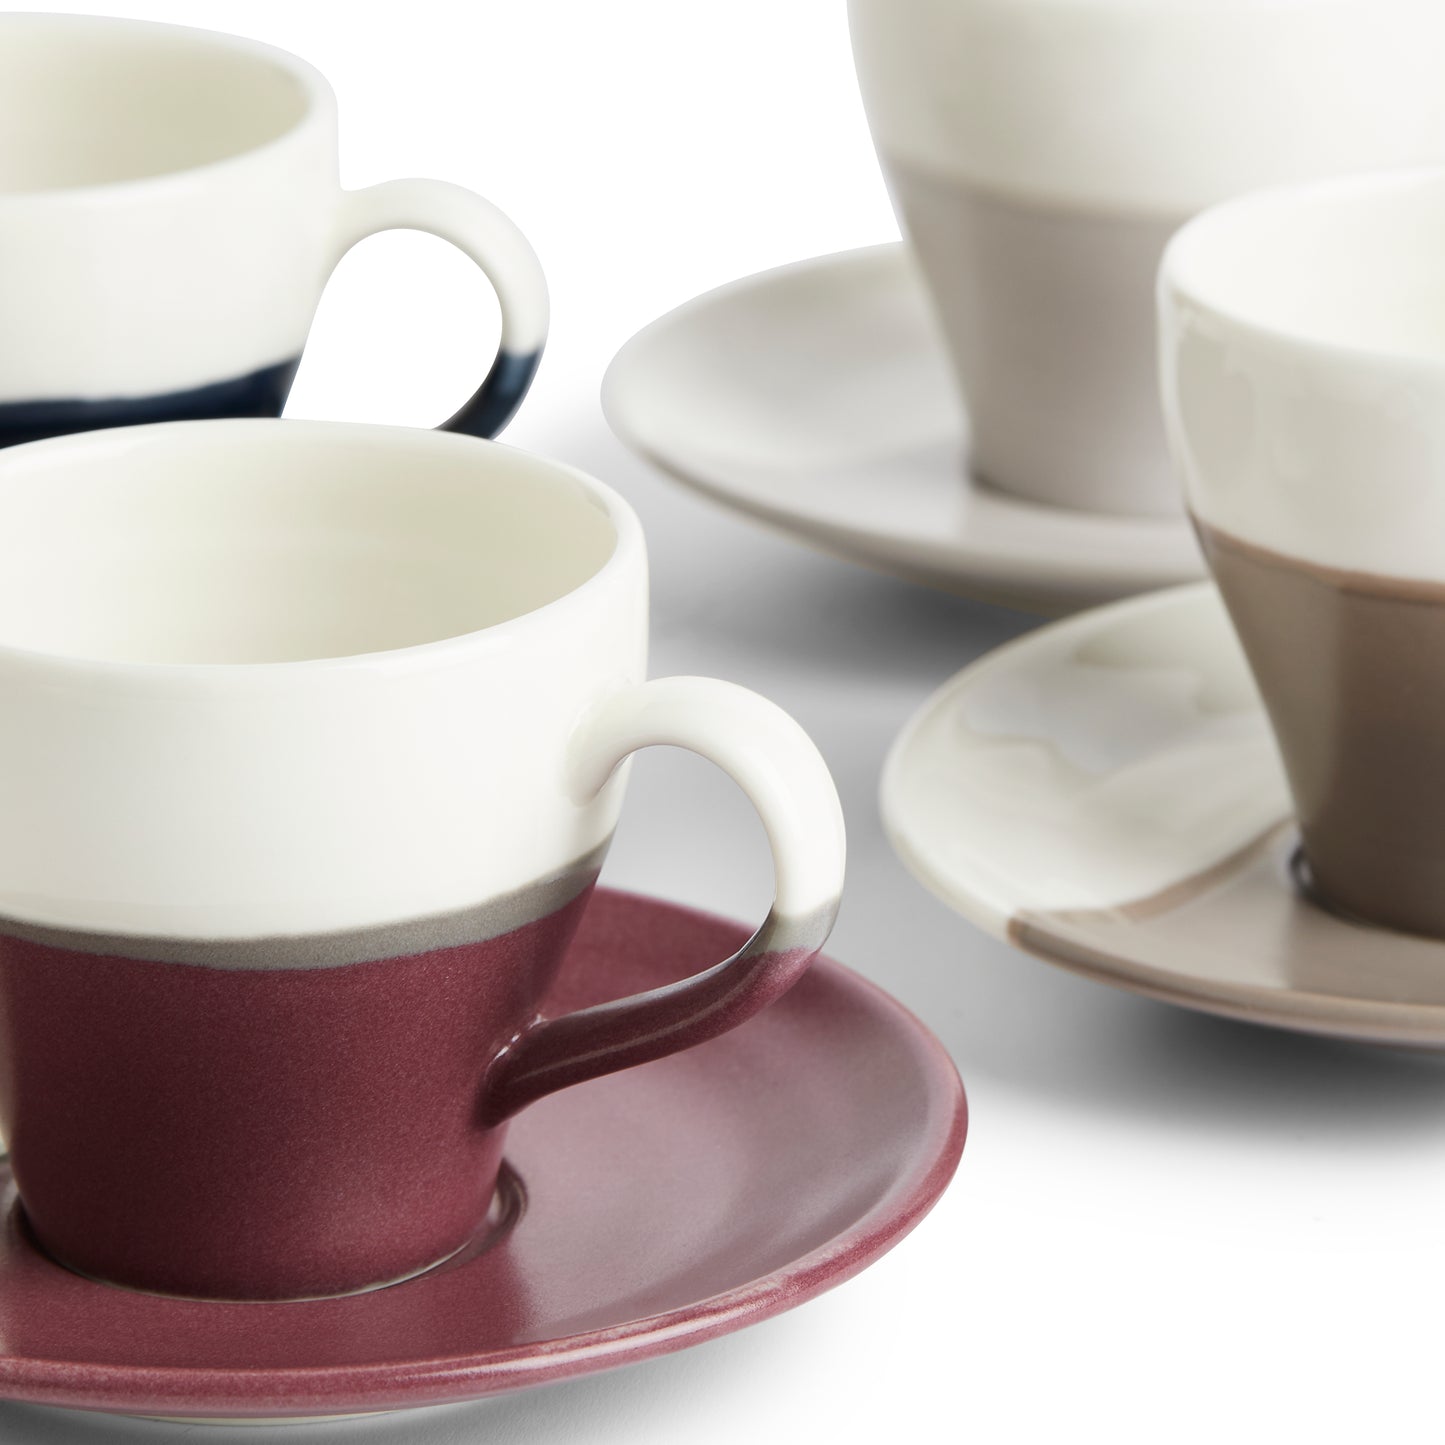 Royal Doulton 1815 Coffee Studio Espresso Cup and Saucer (Set of 4)